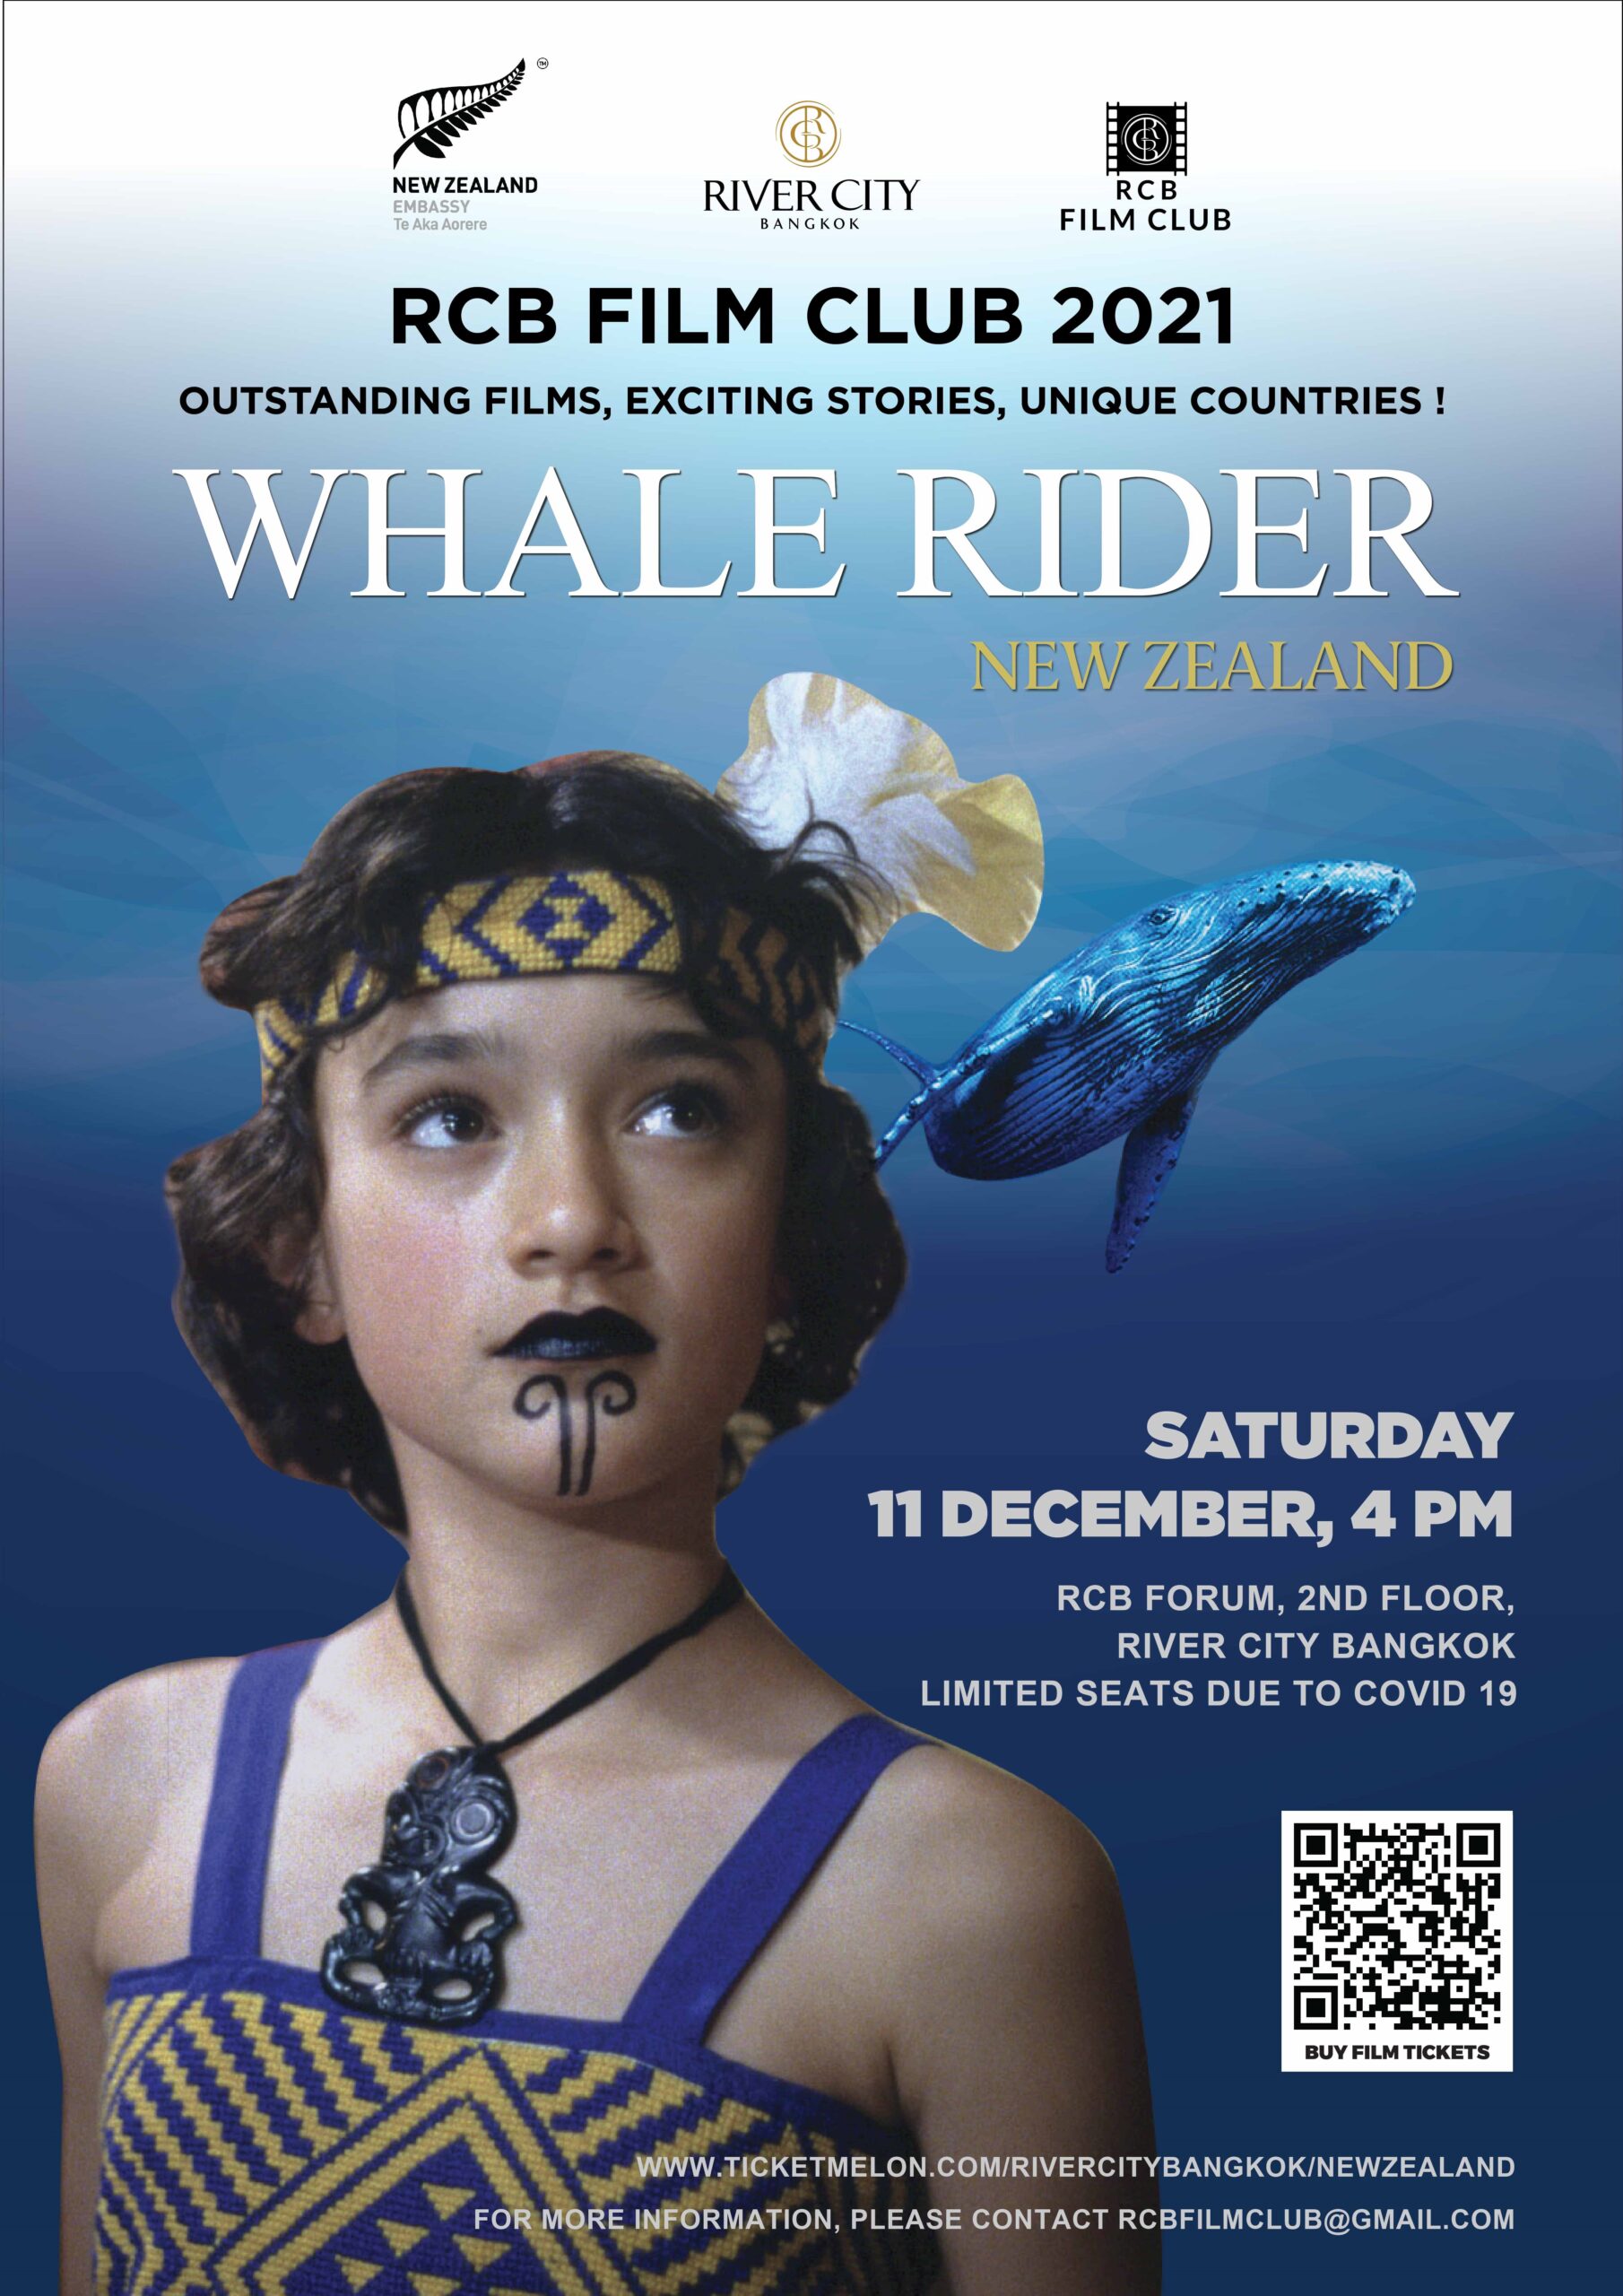 RCB Film Club: Closing Film of the year- ‘ Whale Rider’, N Zealand, Saturday 11 December, 4:00 pm